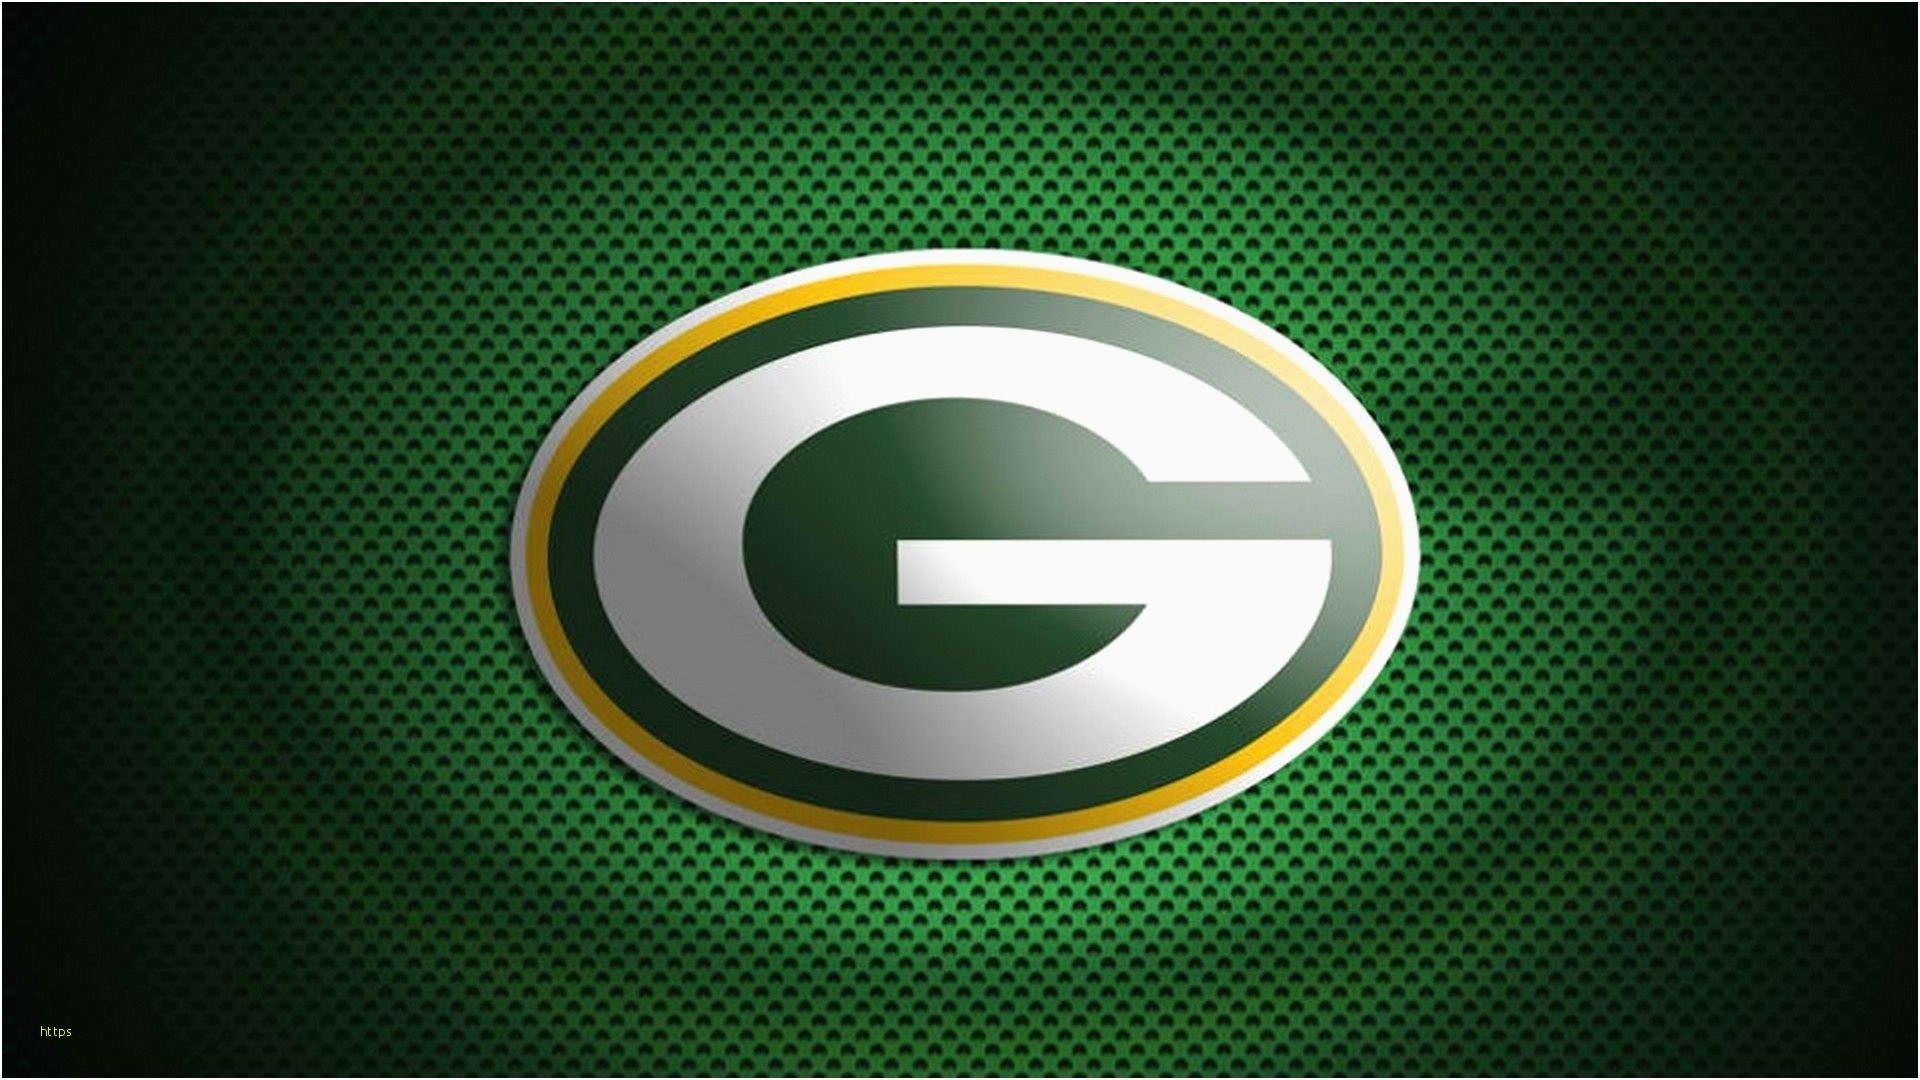 1920x1080 Green Bay Packer Wallpaper Unique Nfl Wallpaper for android Inspiring Zedge  Wallpapers 0d S – the